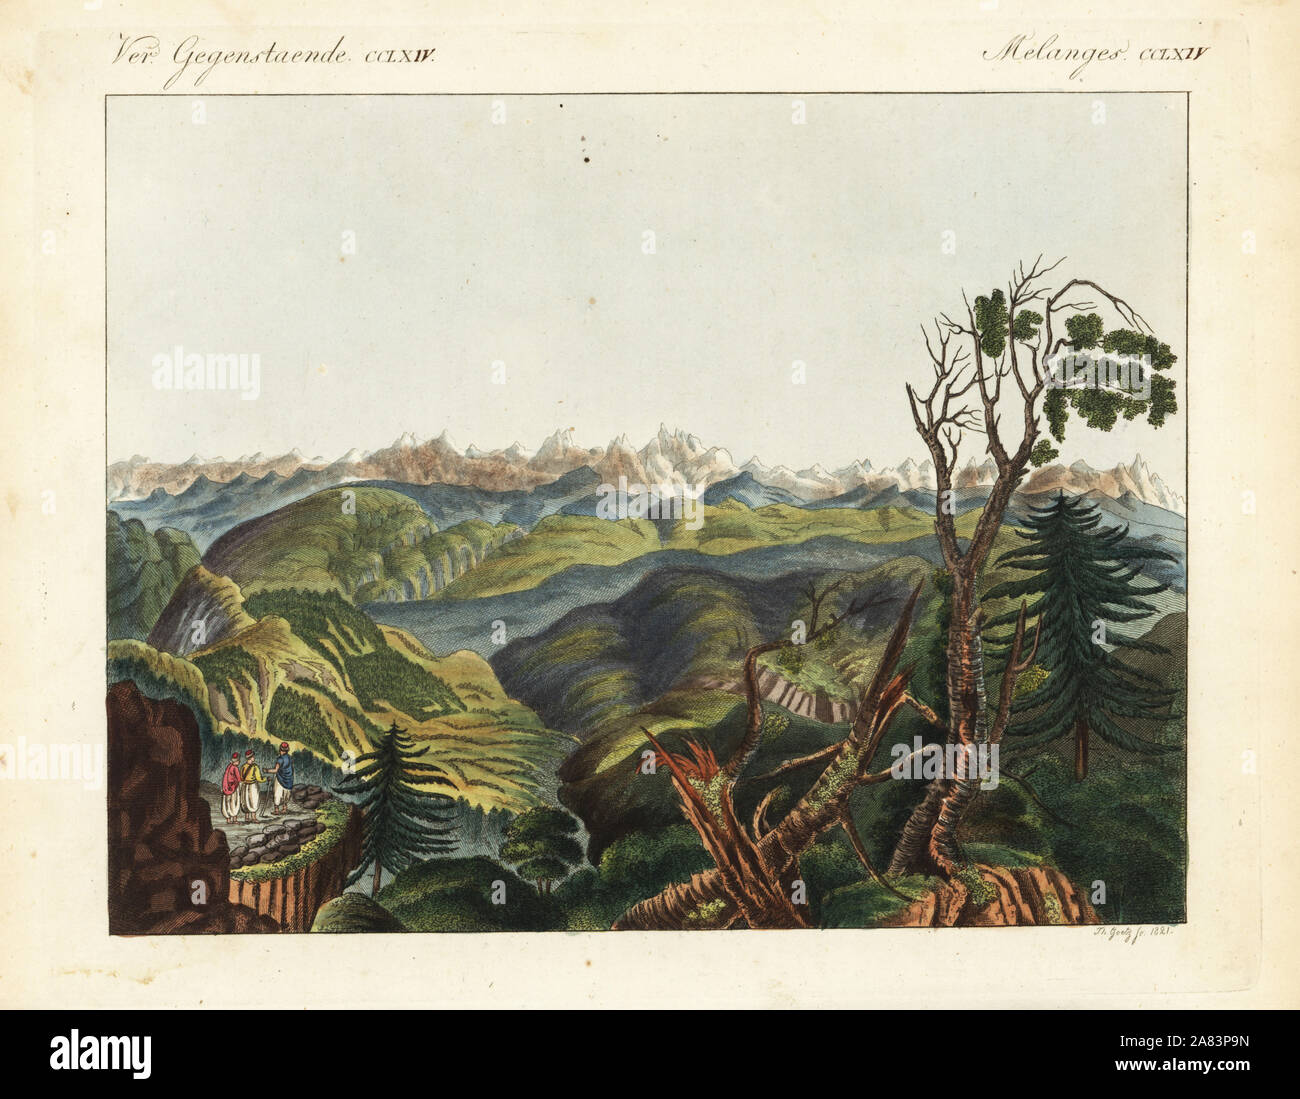 View of the Himalayan mountains. Handcoloured copperplate engraving by Theodore Goetz from Friedrich Johann Bertuch's Bilderbuch fur Kinder (Picture Book for Children), Weimar, 1823. Stock Photo